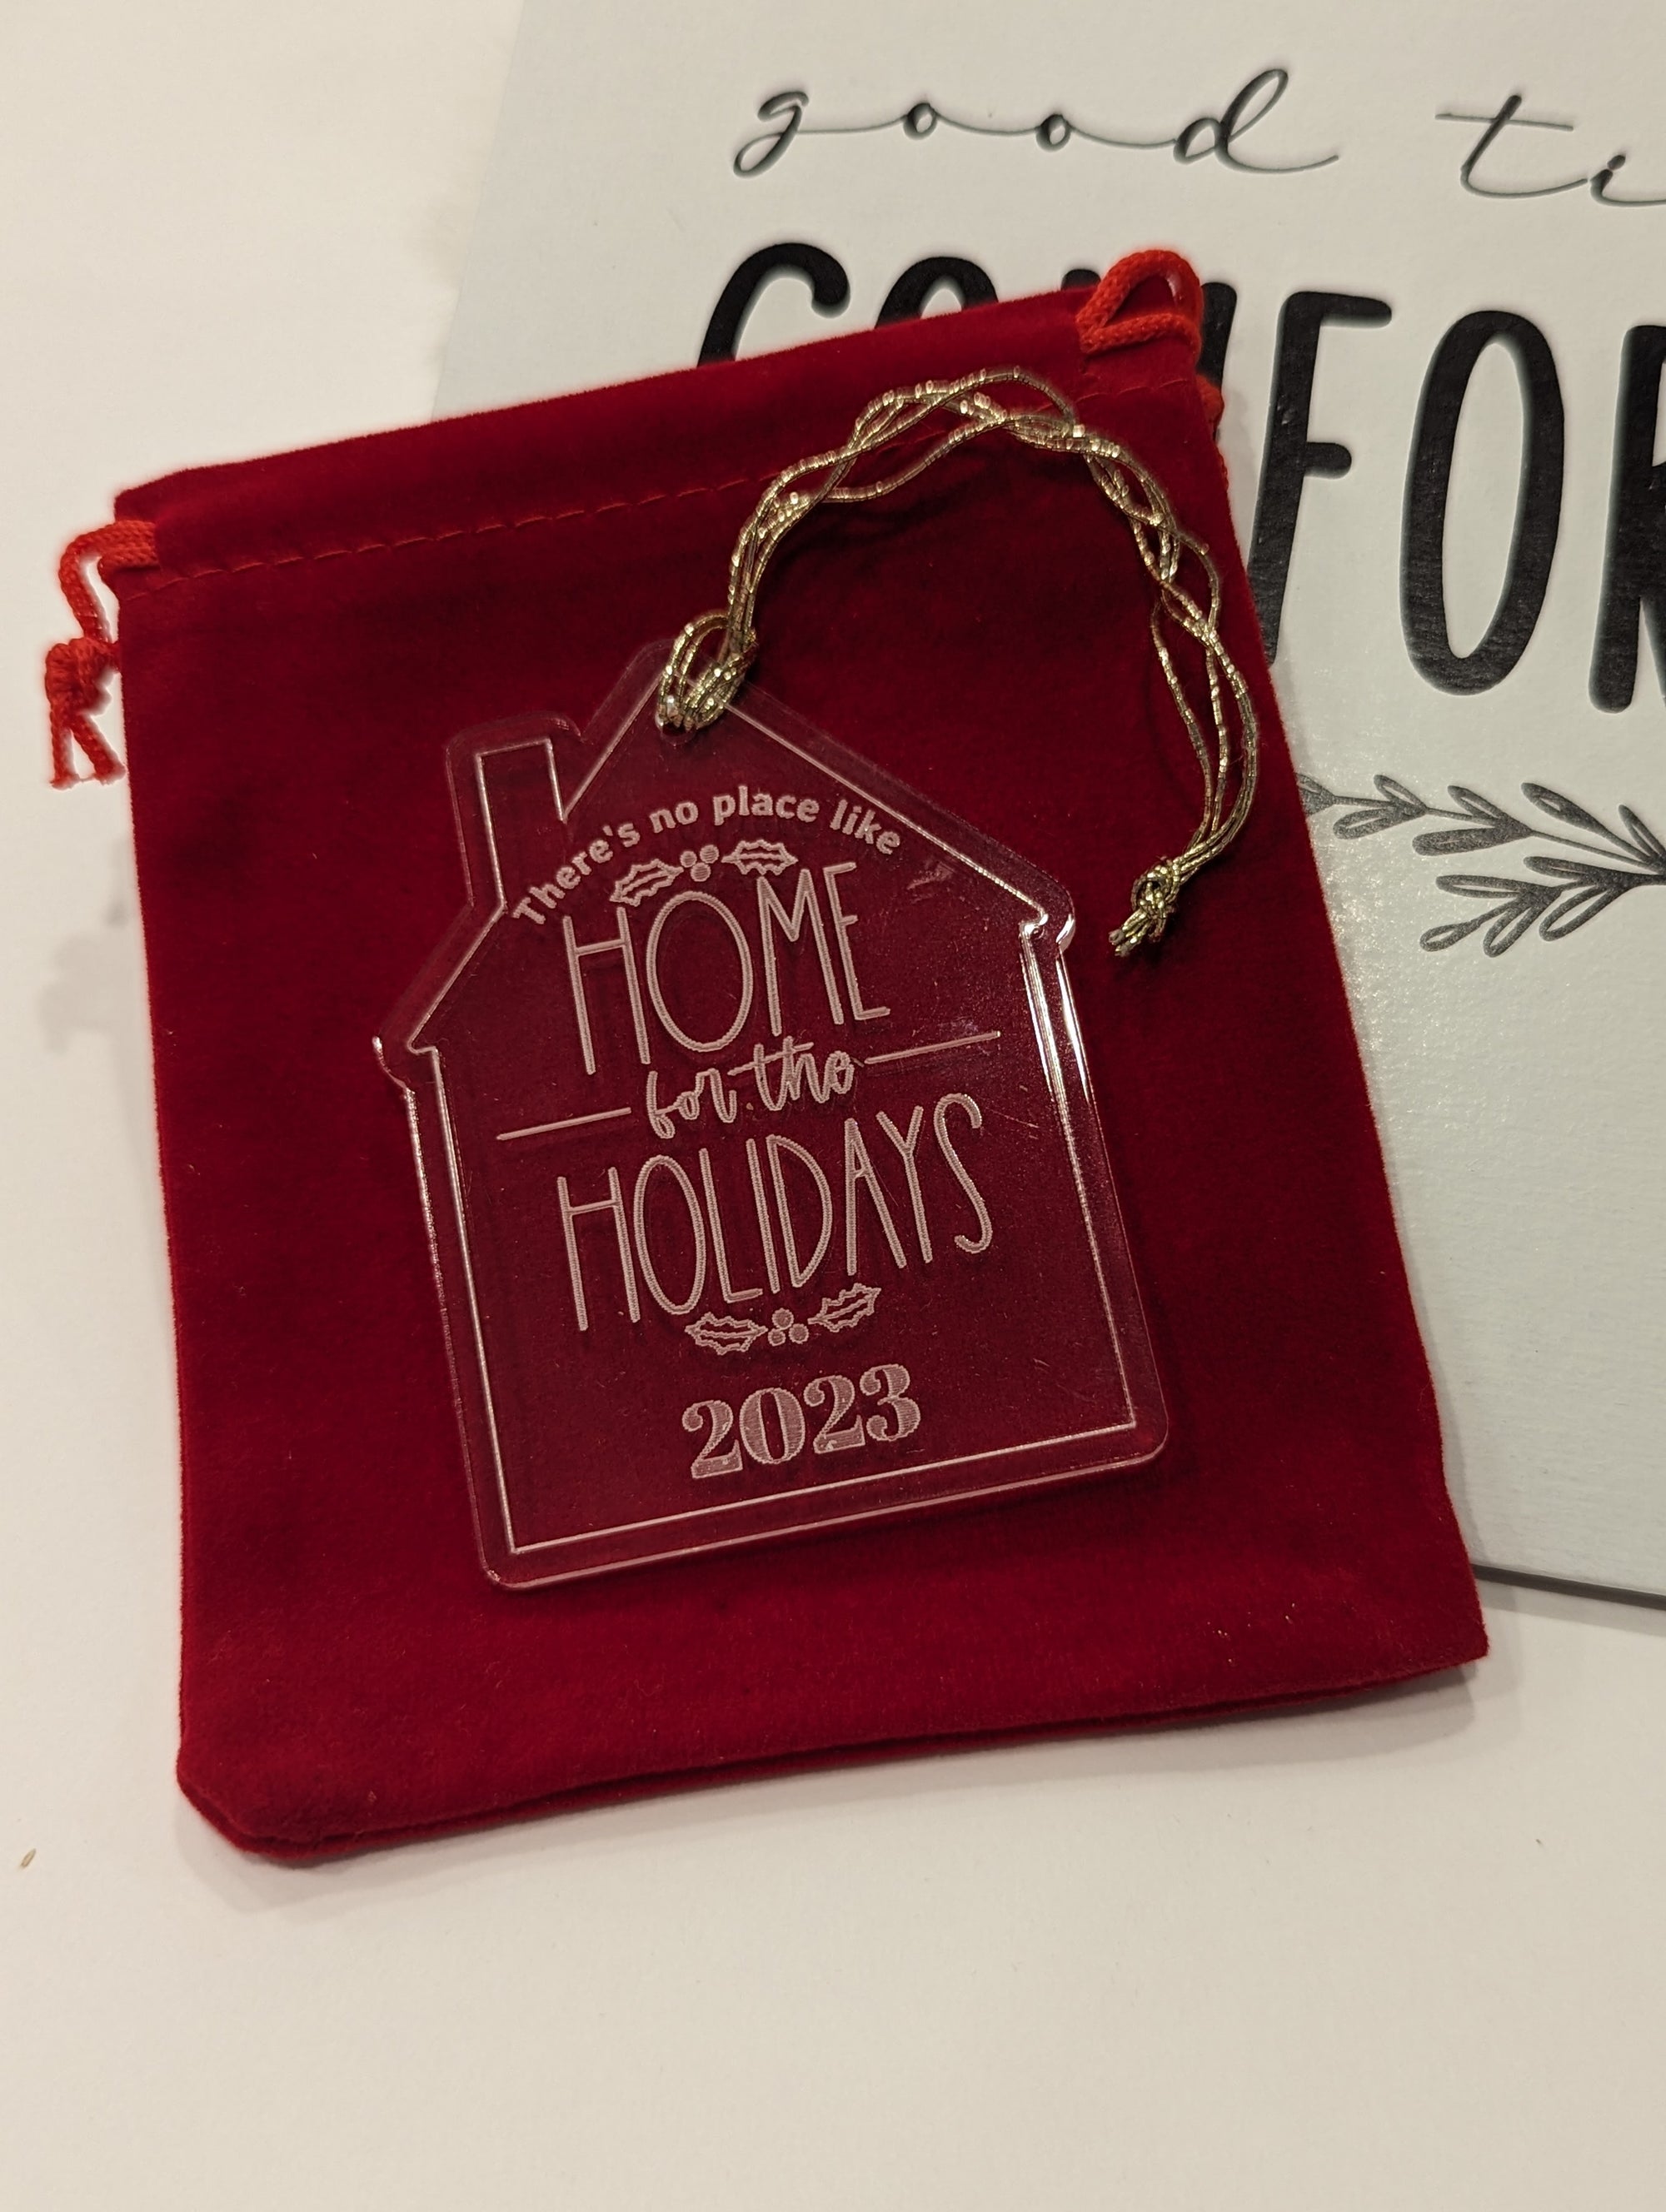 There's no place like home - Holiday Ornament